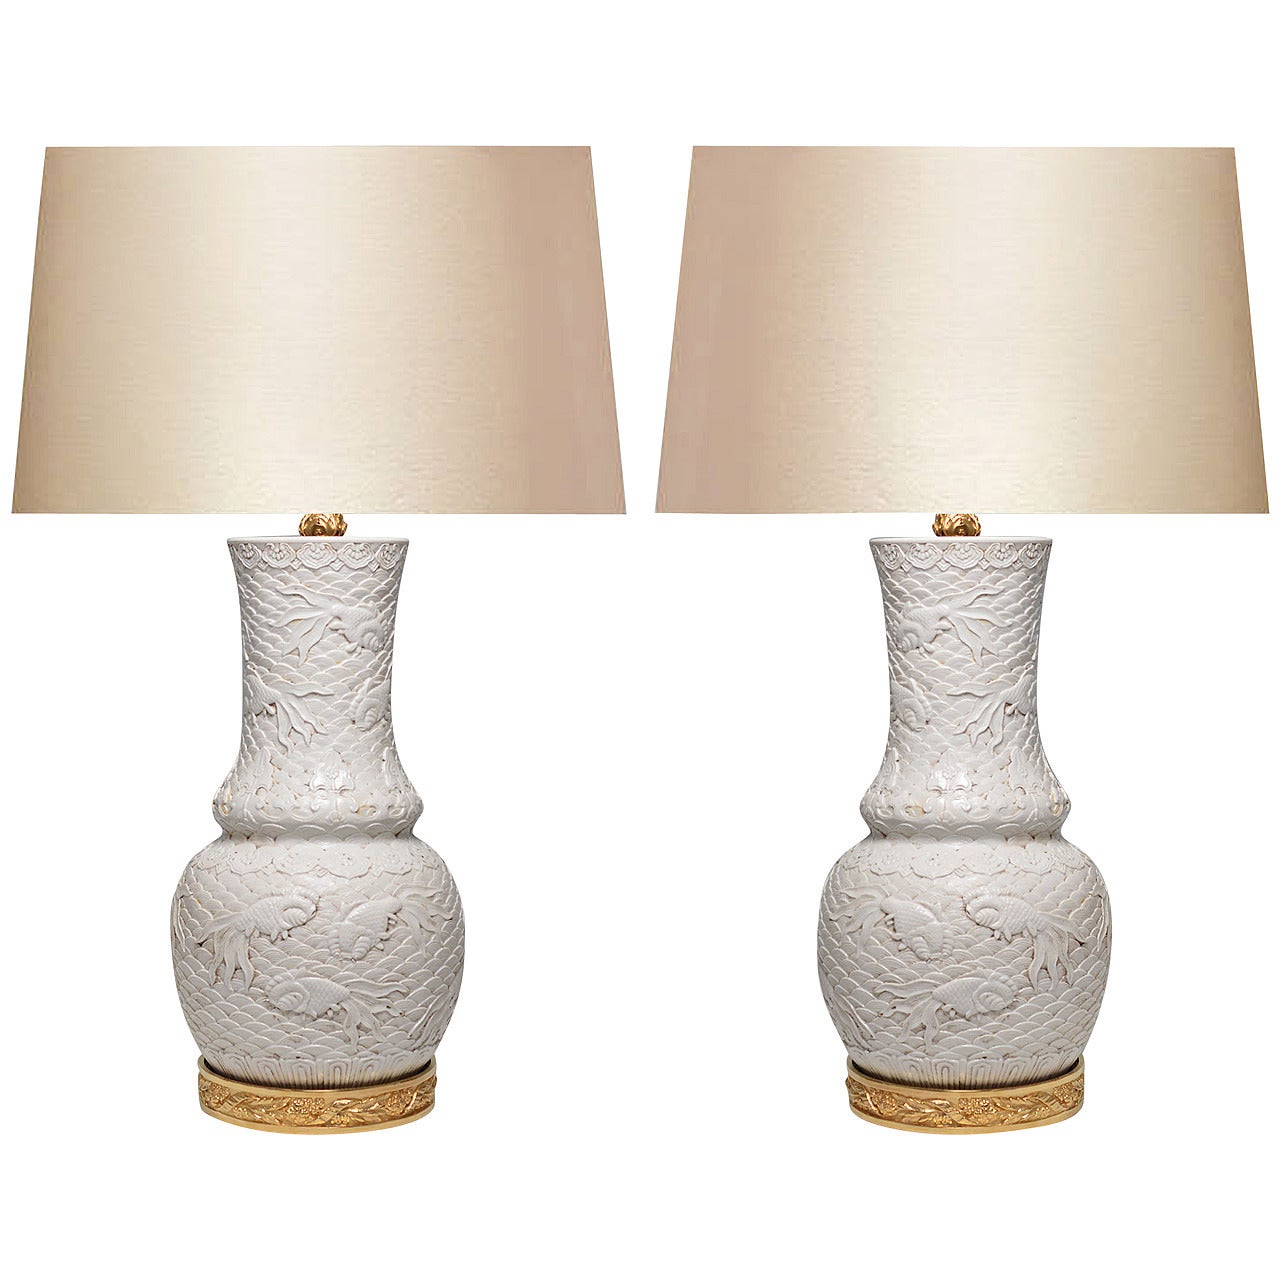 Pair of Fine Carved White Porcelain Lamps